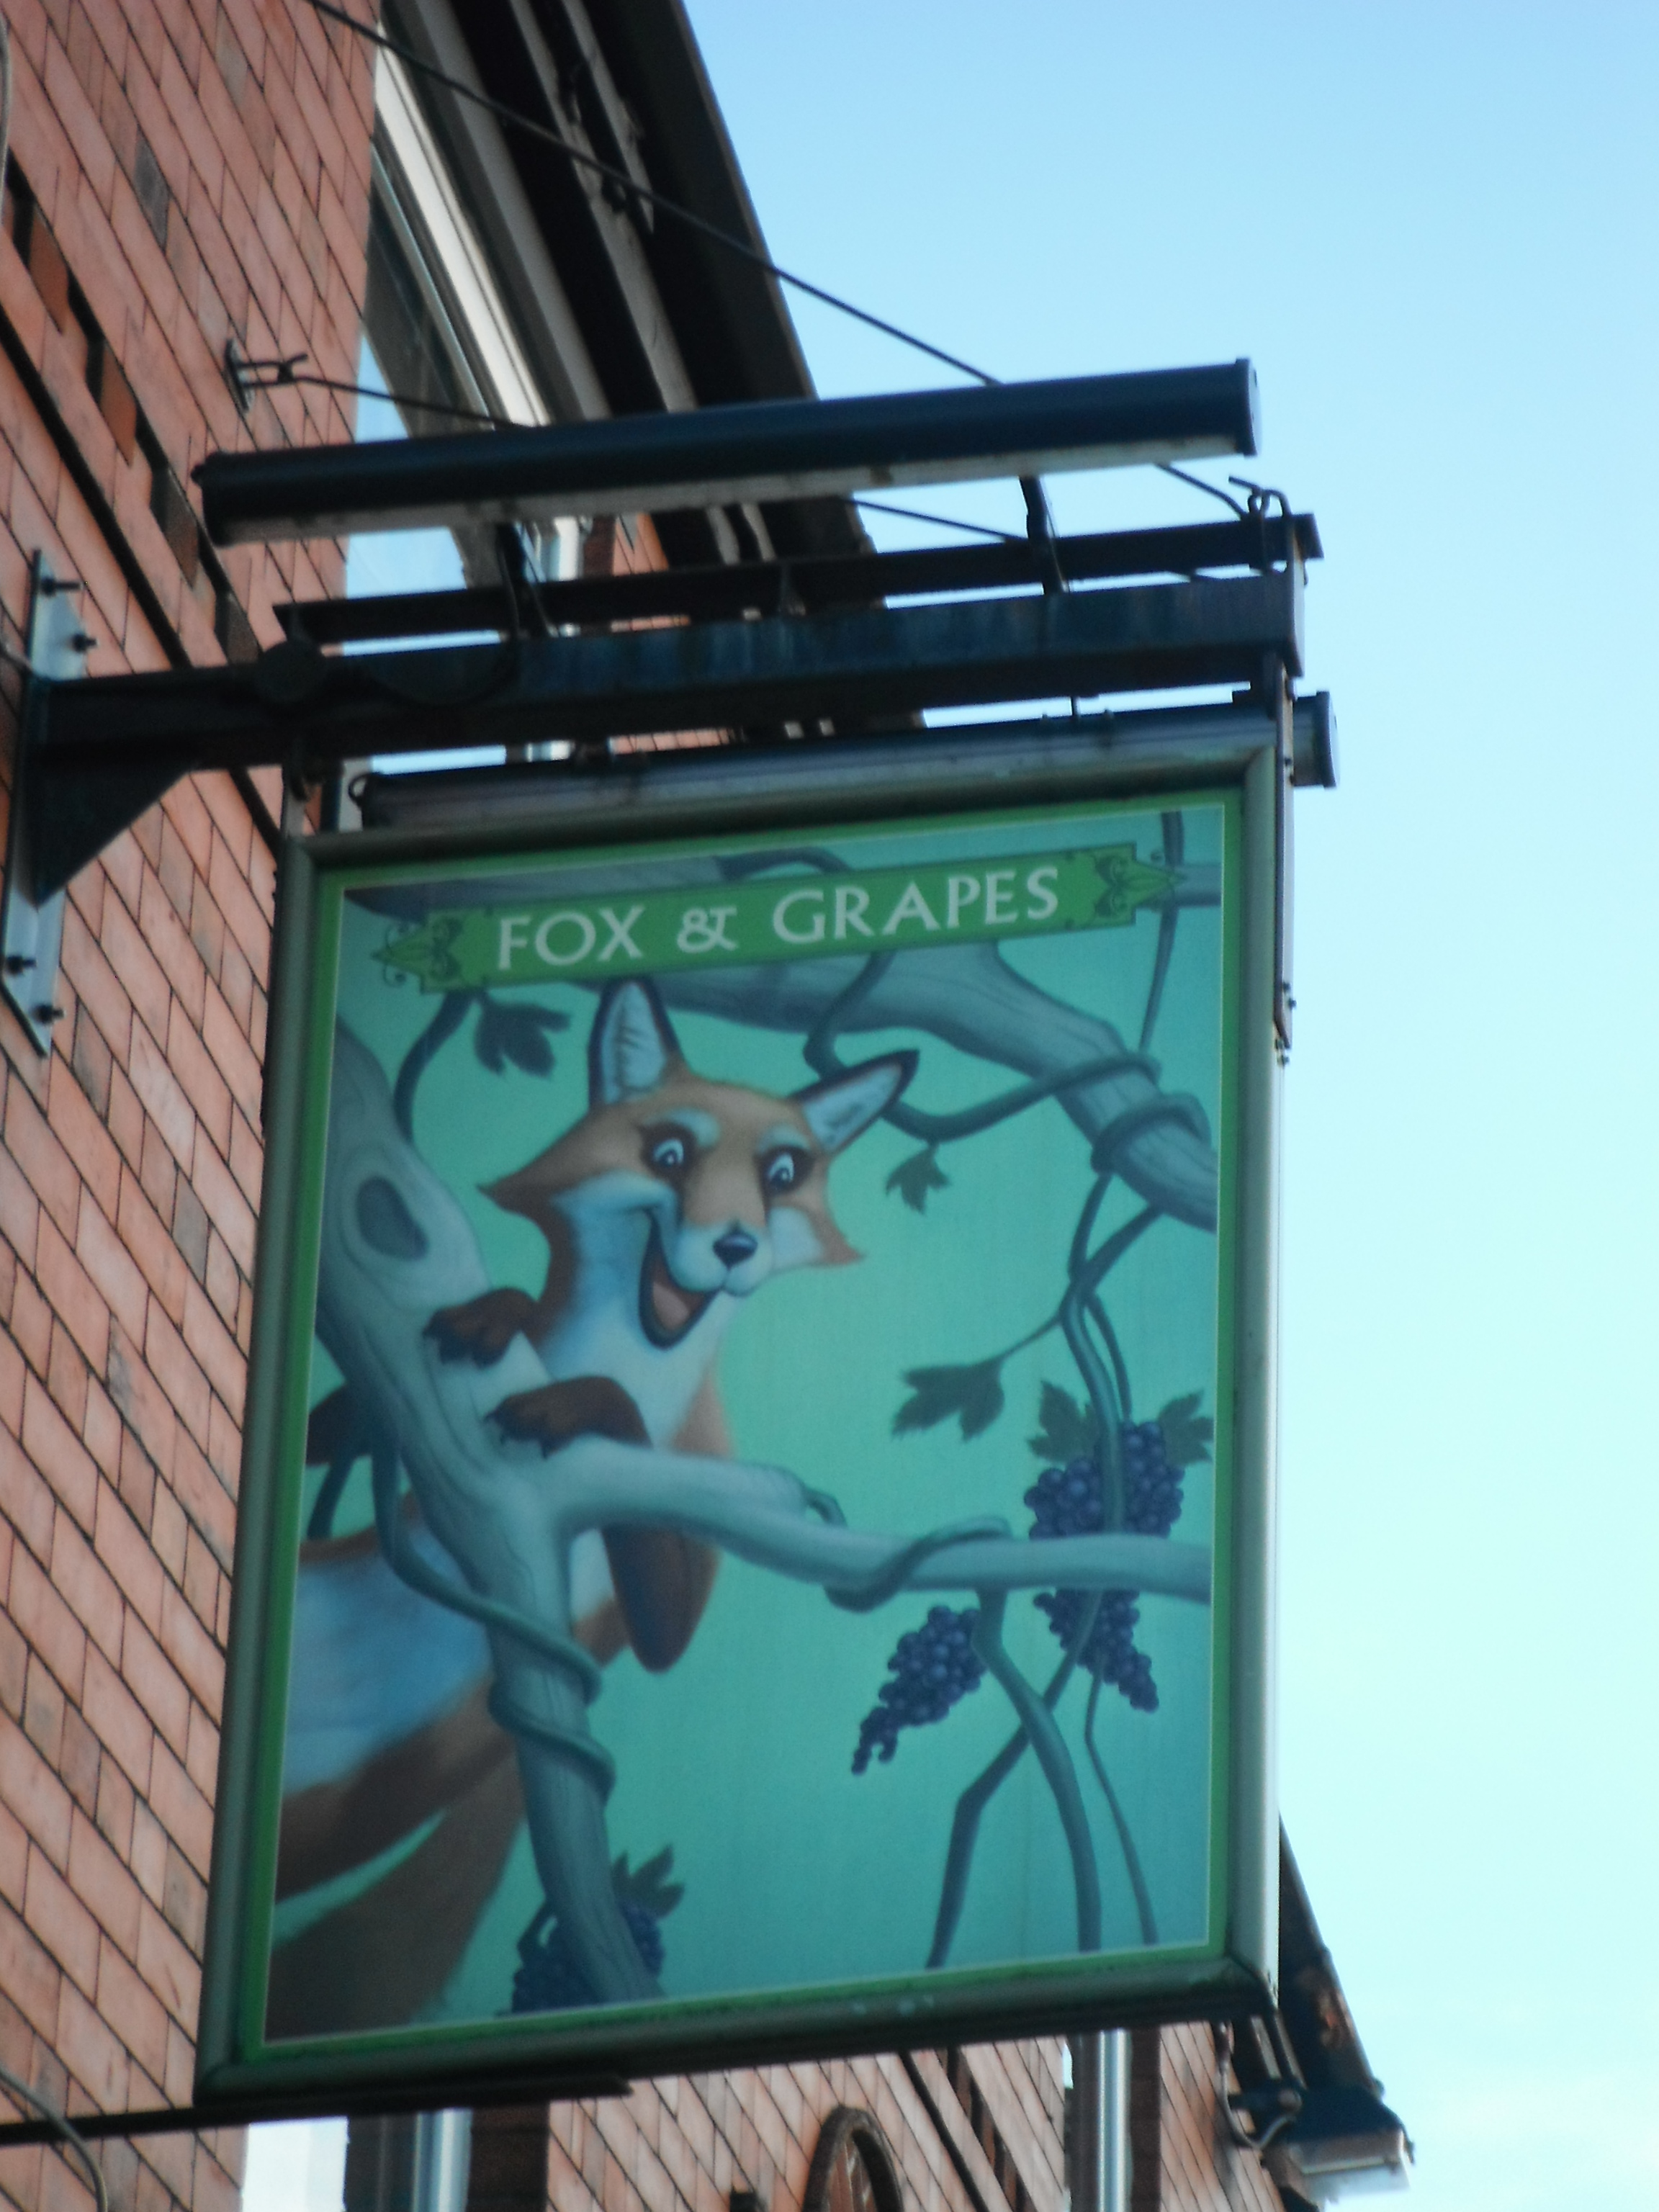 Photo taken by me – The Fox And Grapes pub sign, Preston